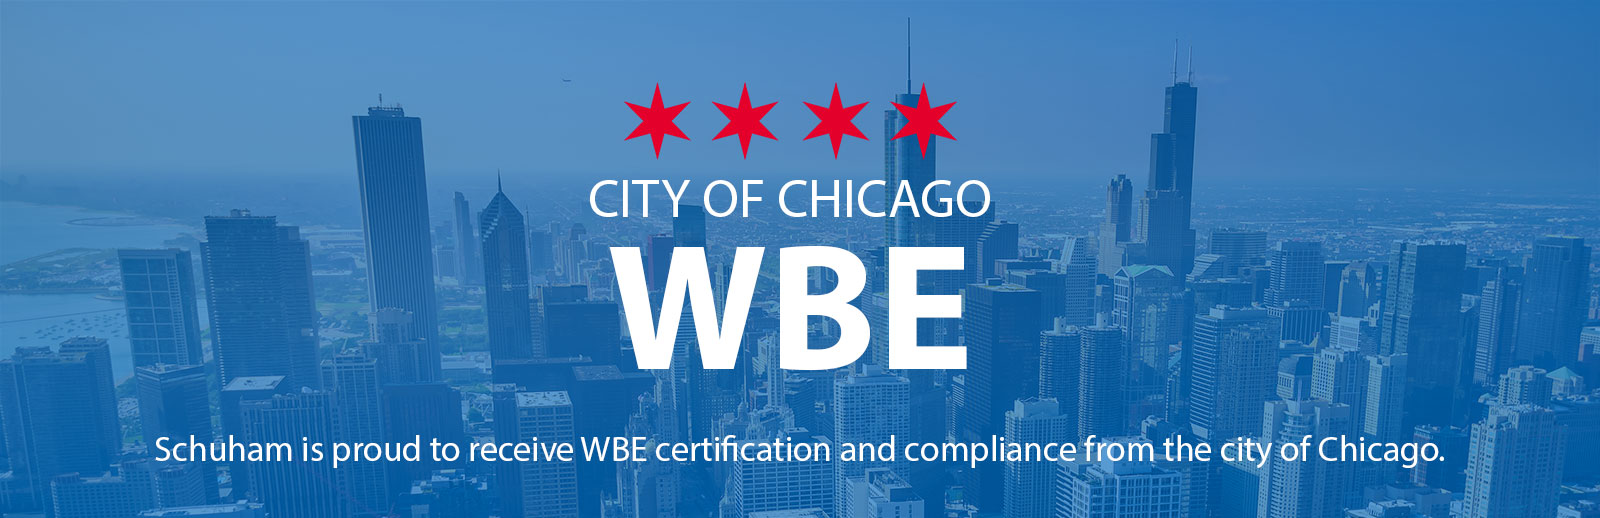 Schuham is proud to receive WBE certification and compliance from the city of Chicago